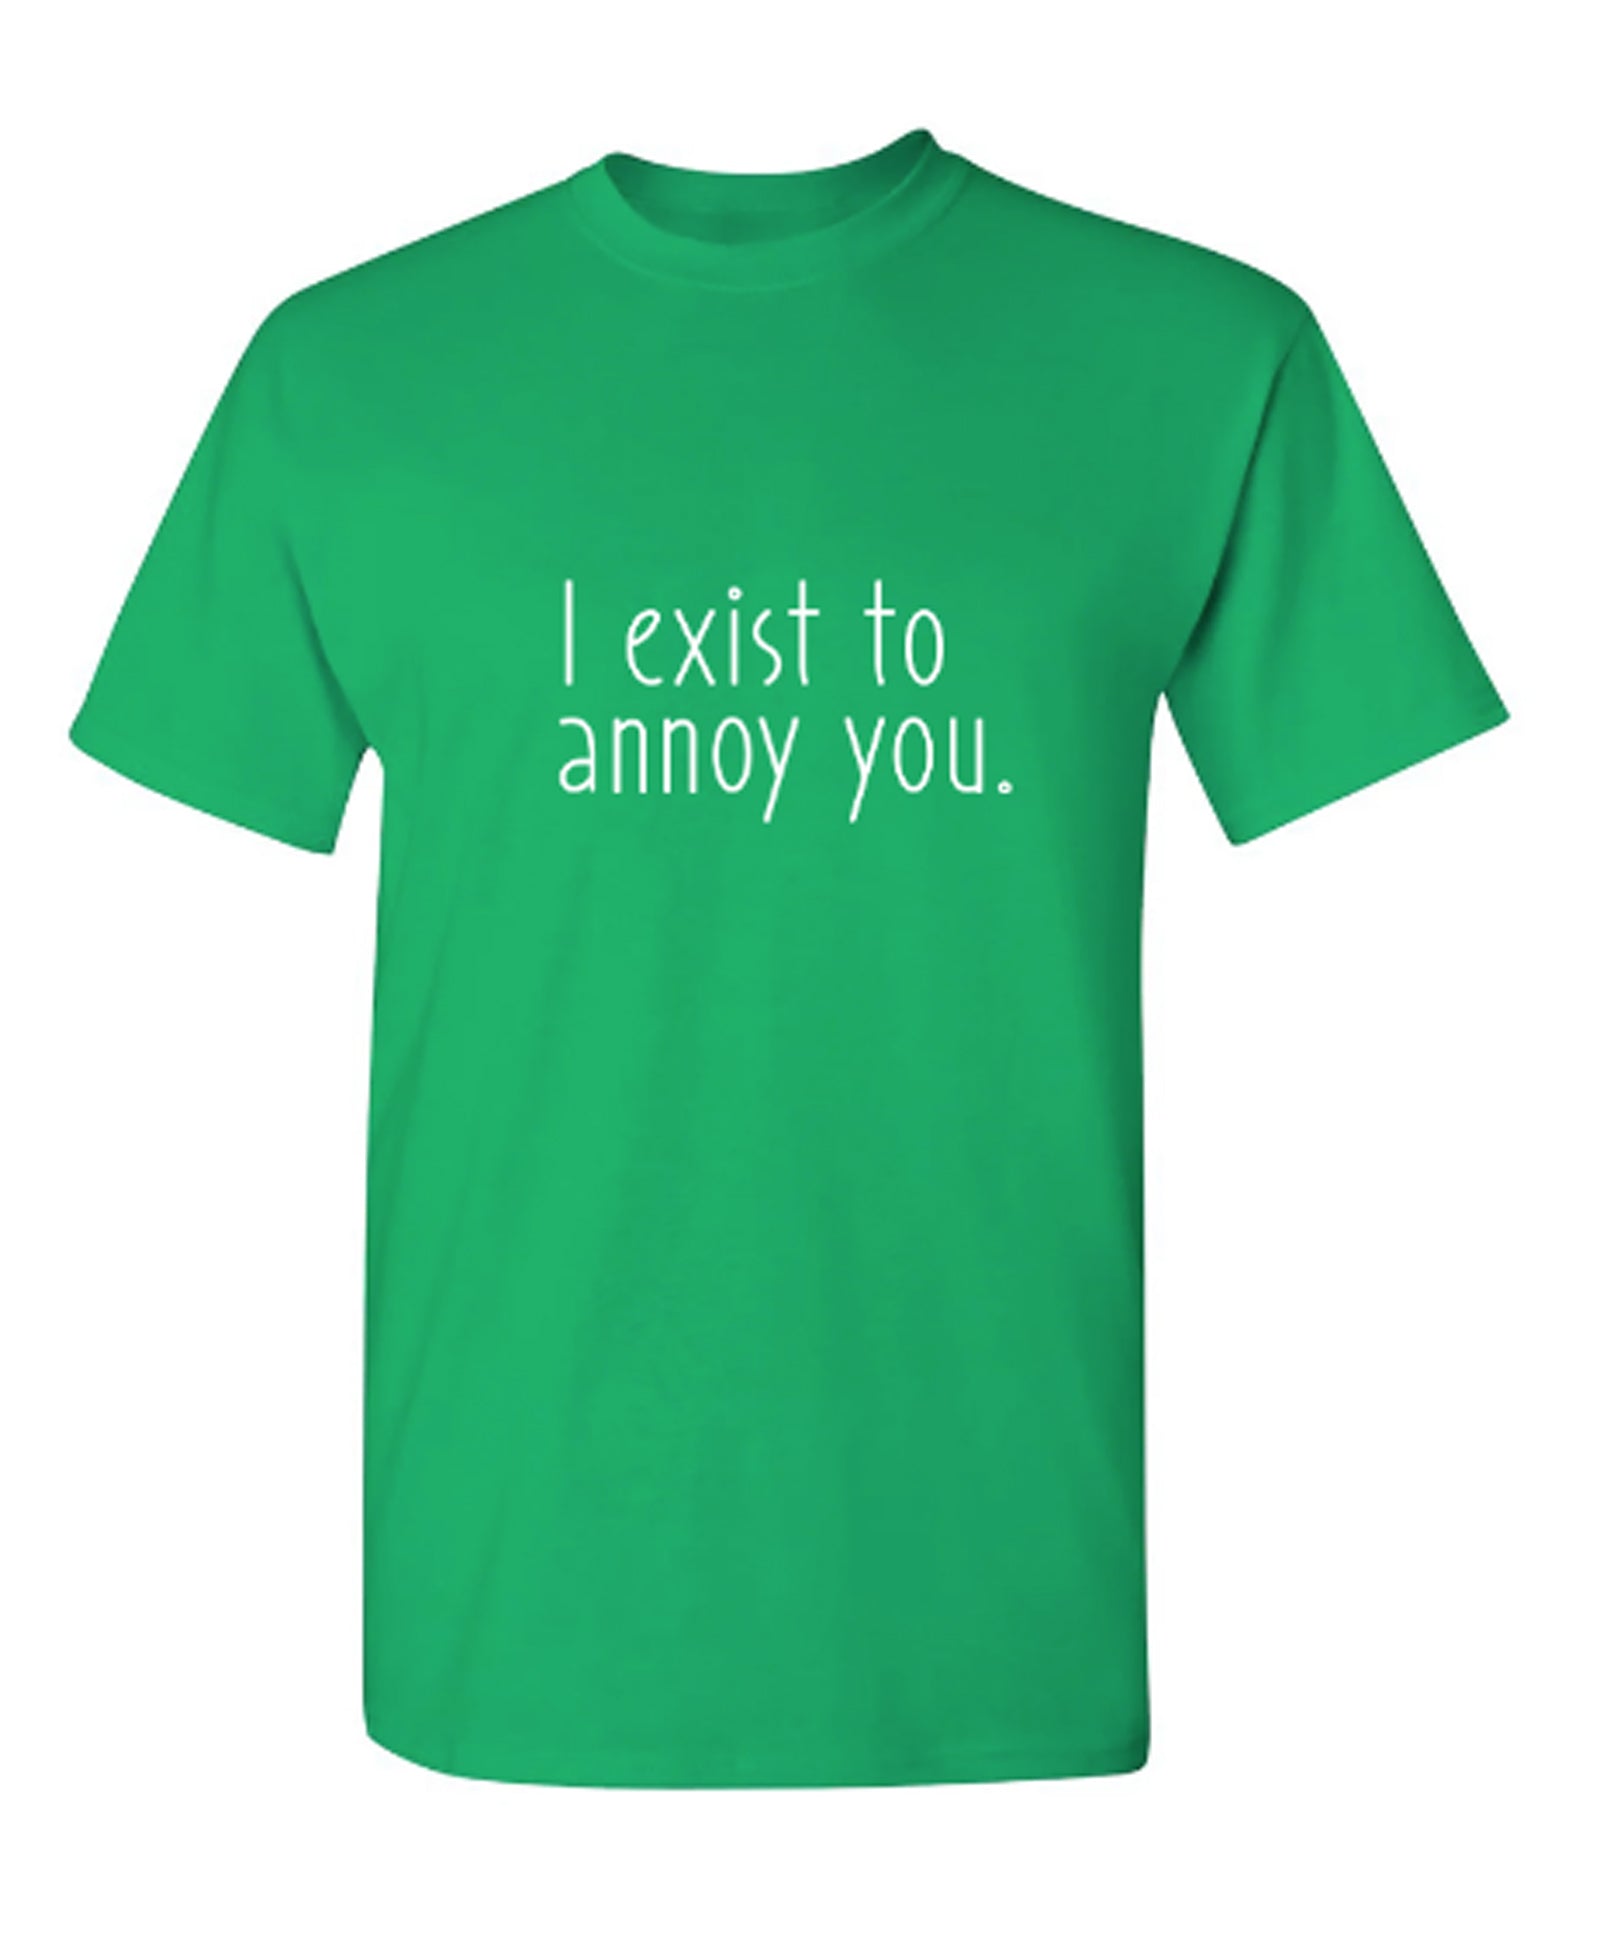 I exist to annoy you. - Funny T Shirts & Graphic Tees